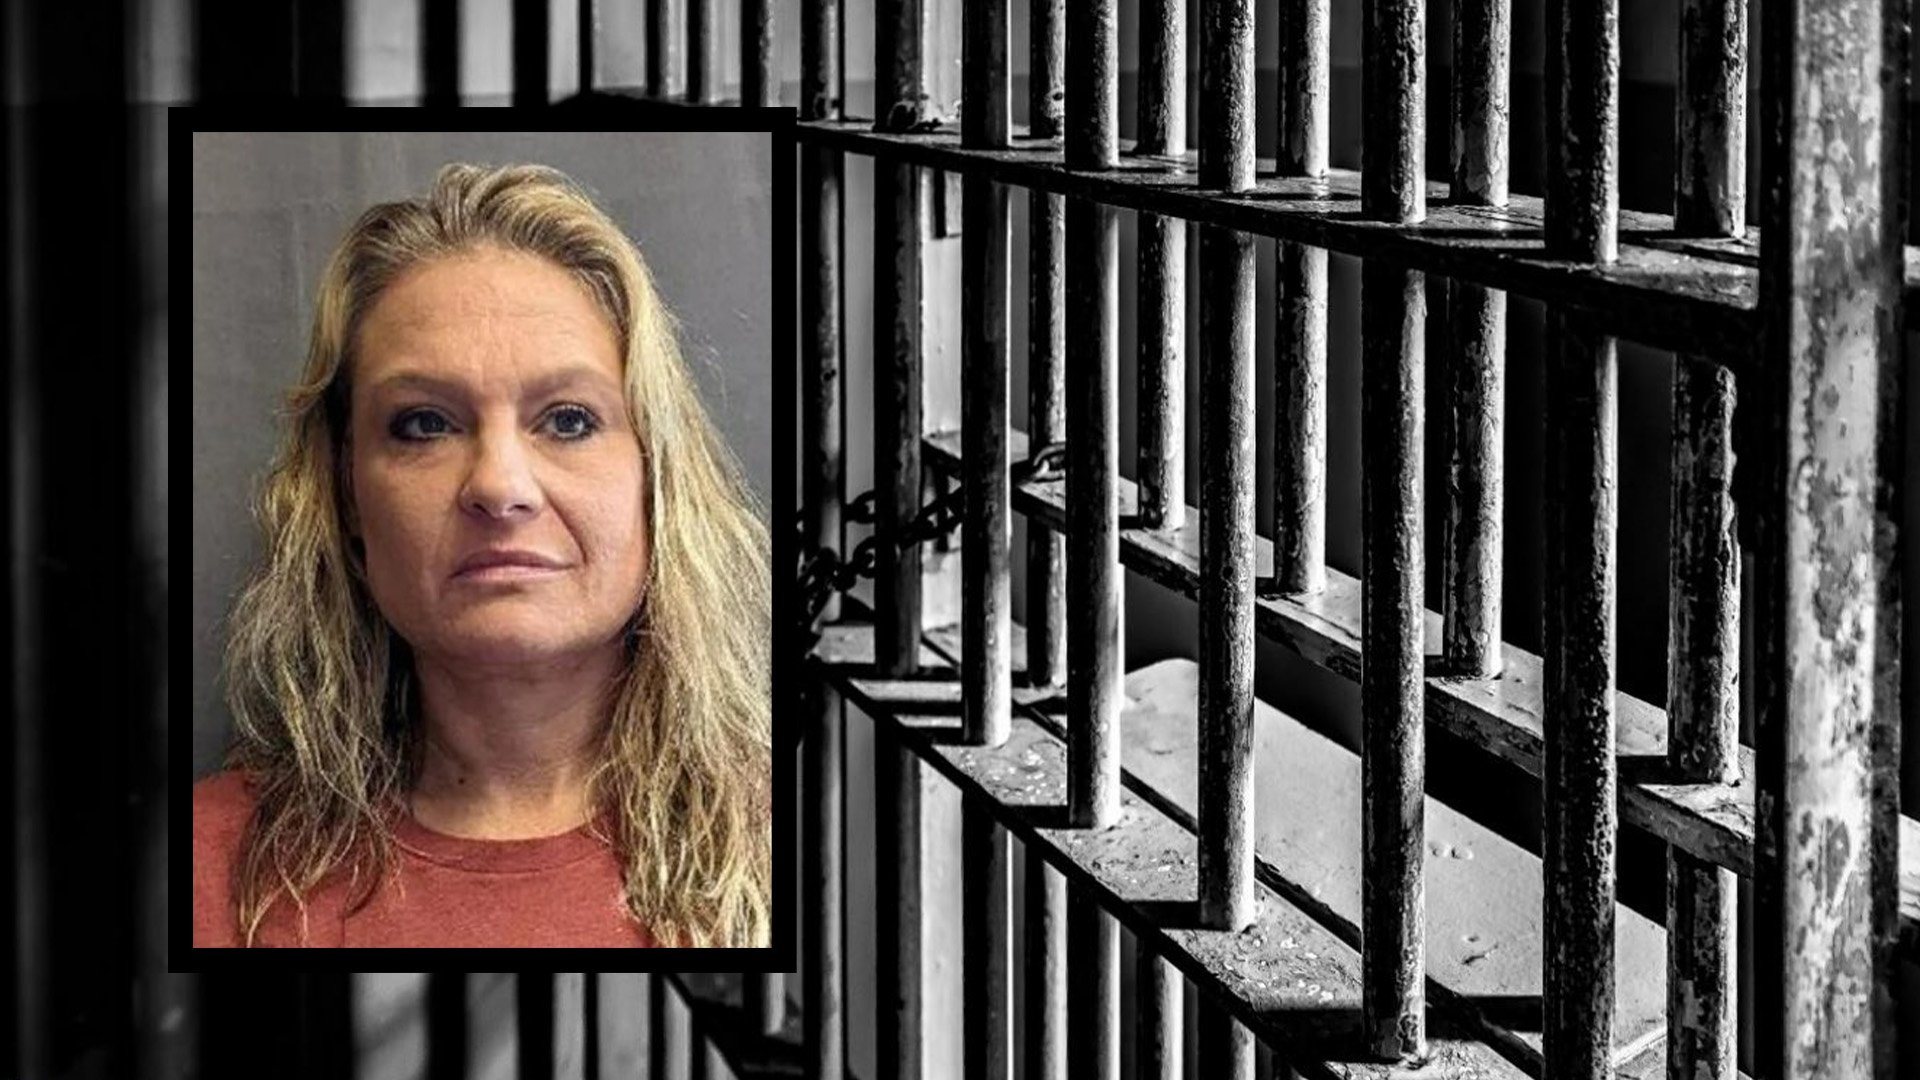 Shelly Stallings, 43, of Morganfield, Kentucky, pleaded guilty on Aug. 24, 2022, to five felonies and two misdemeanors tied to the Jan. 6, 2021, riot on Capitol Hill. She faces up to 56 years behind bars on all the charges. Coffee or Die Magazine composite.